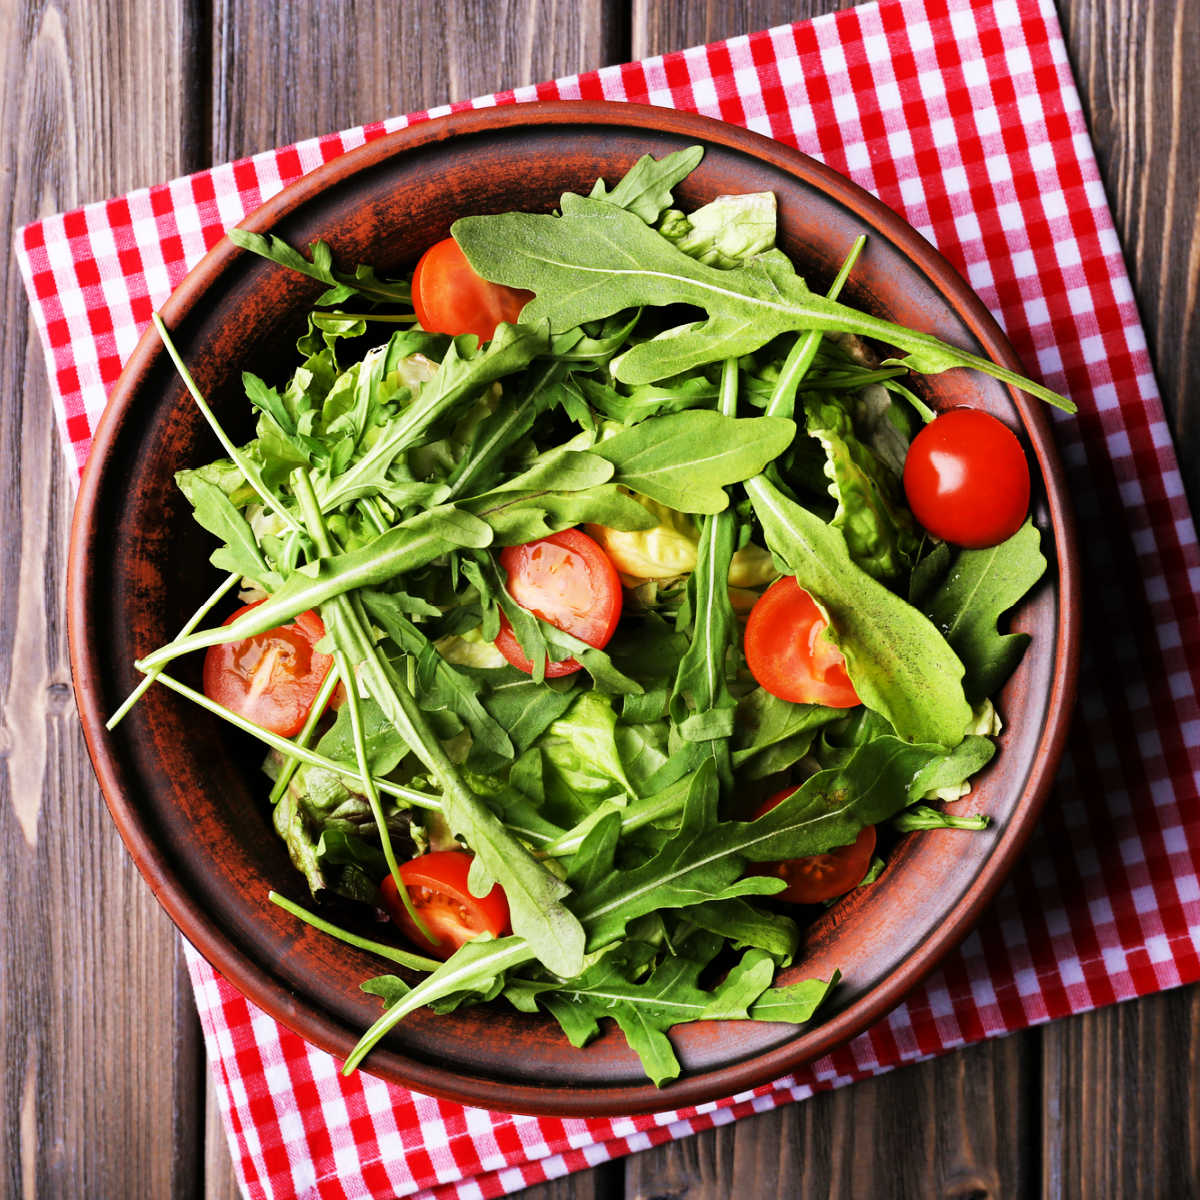 Fresh arugula salad with cherry tomatoes in brown pottery bowl on a red and white checked napkin set on a wood table.